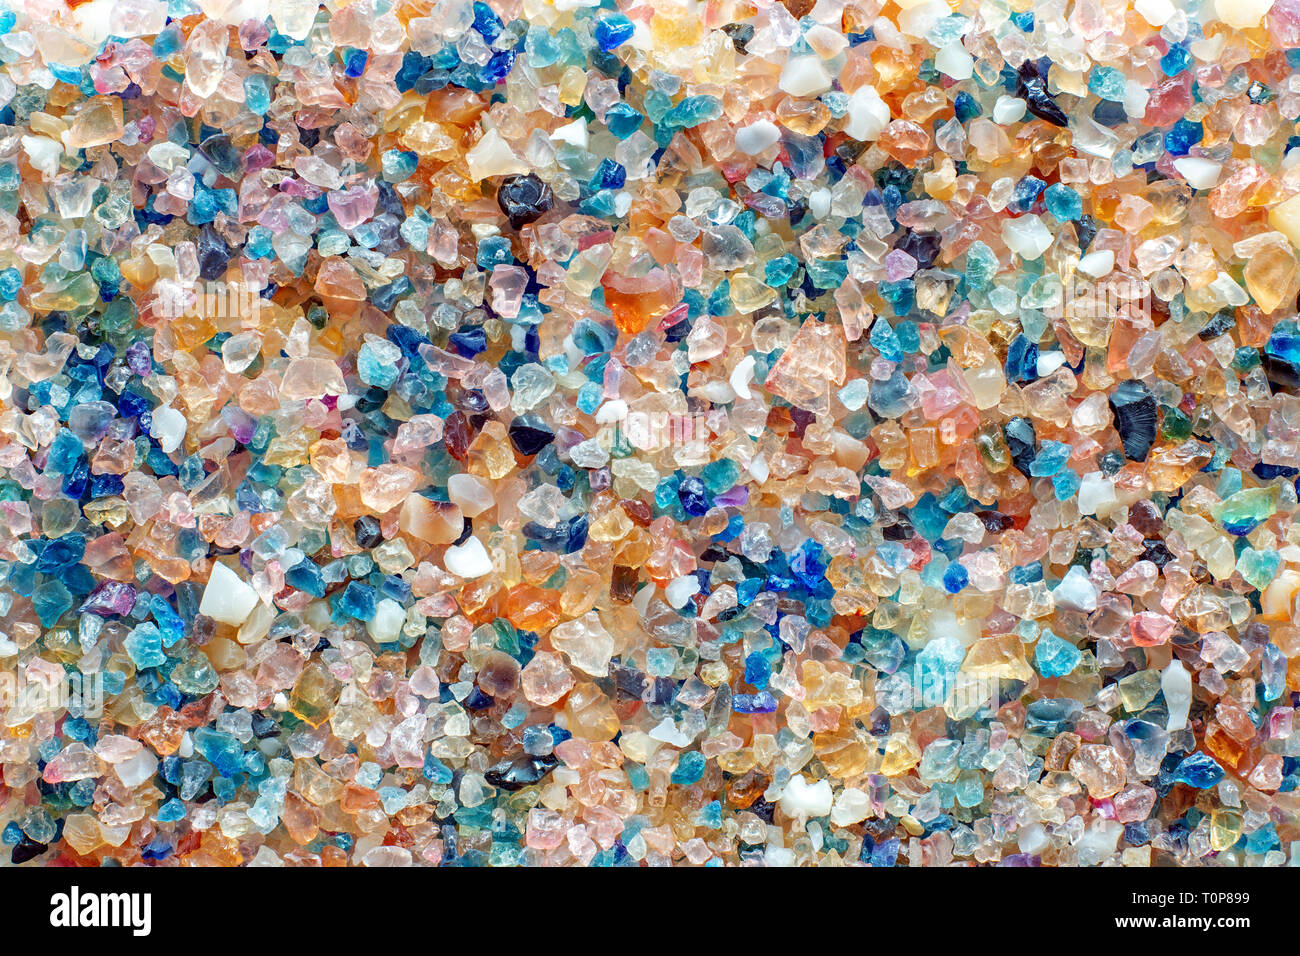 Small shiny colorful stones as a background pattern Stock Photo